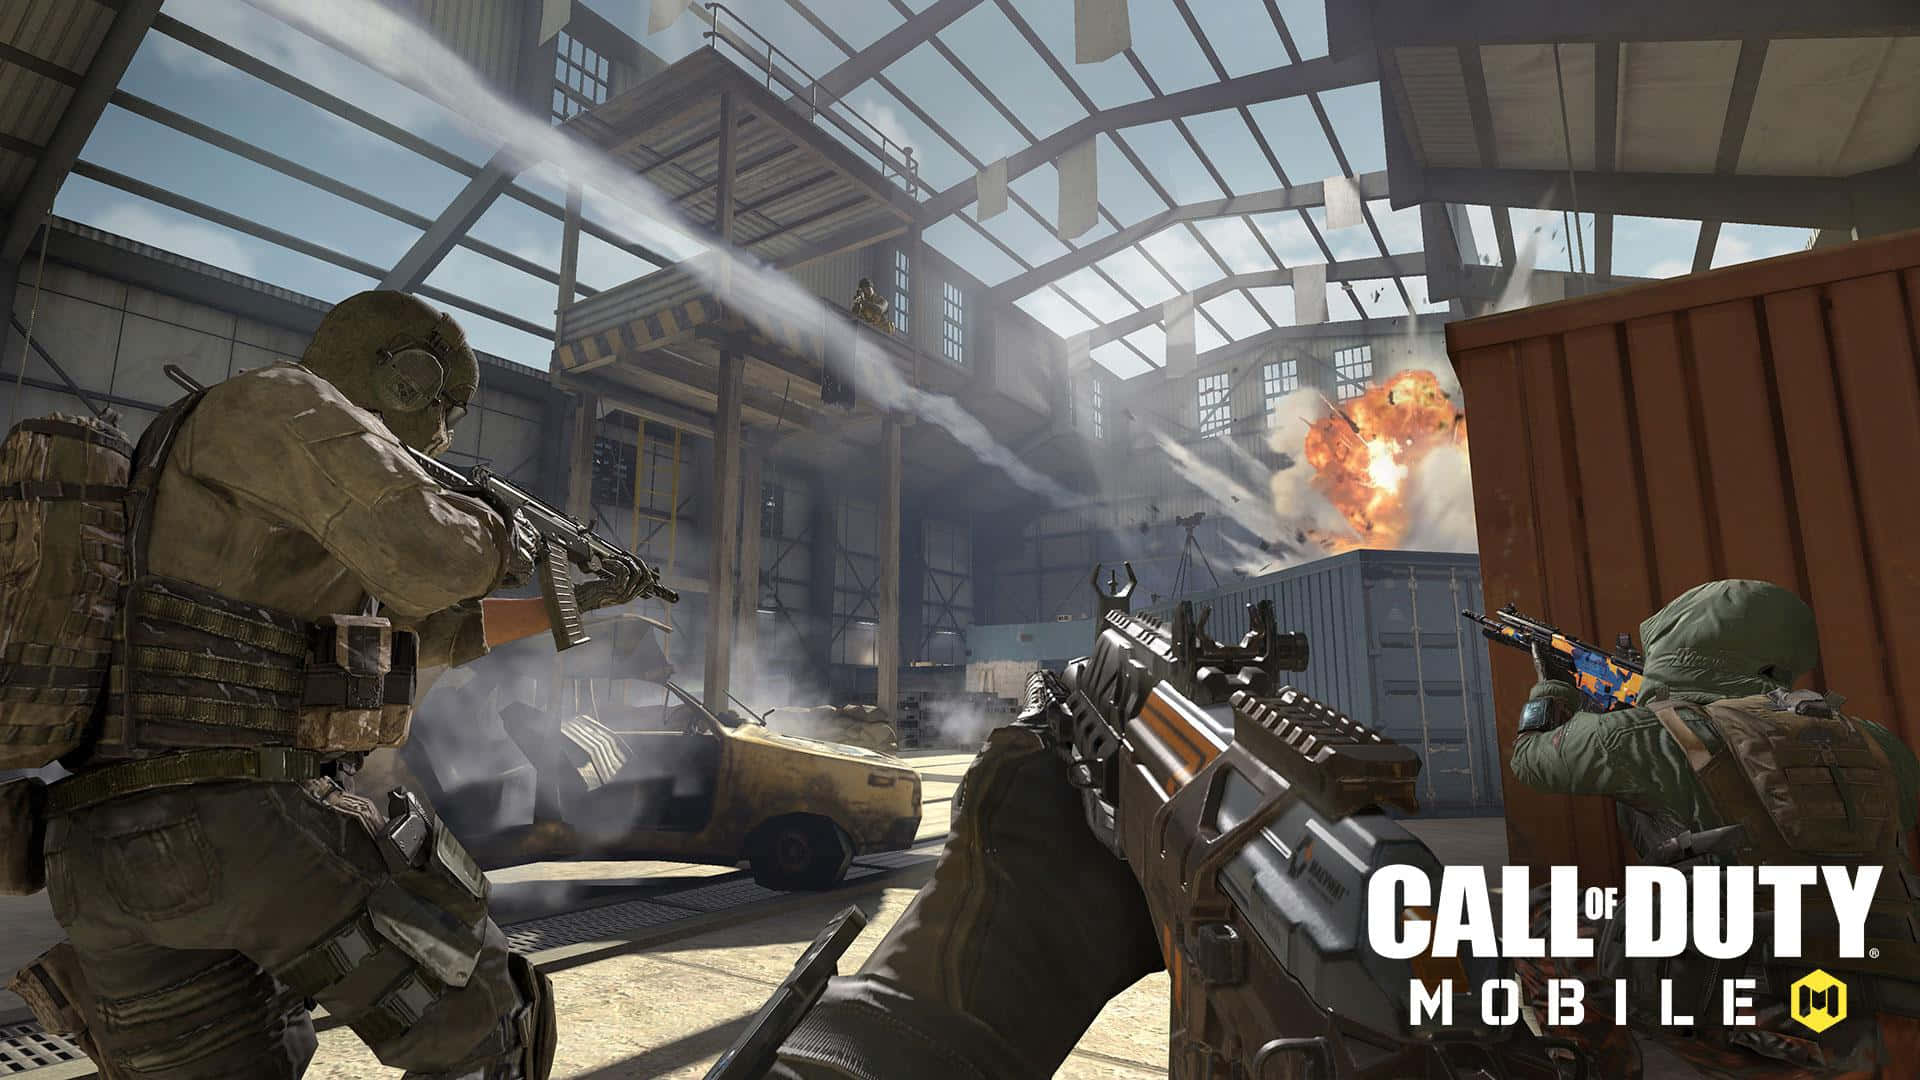 Intense Battle Scene from Call of Duty First Person Shooter Wallpaper